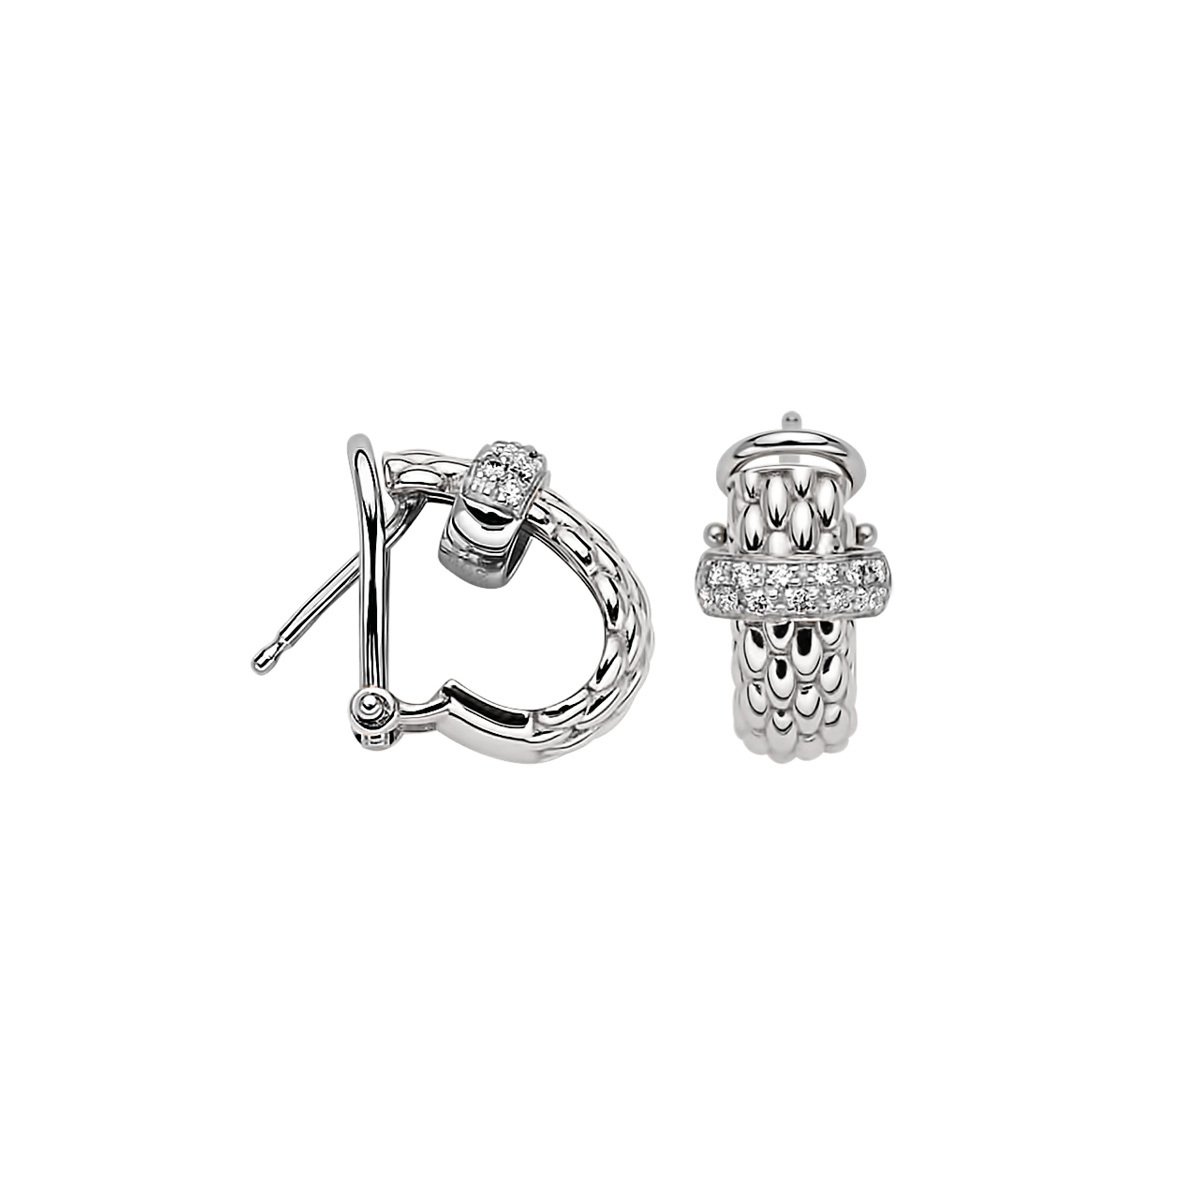 Vendome Earrings Half Hoop Earrings in 18kt White Gold with White Gold and White Diamond Element